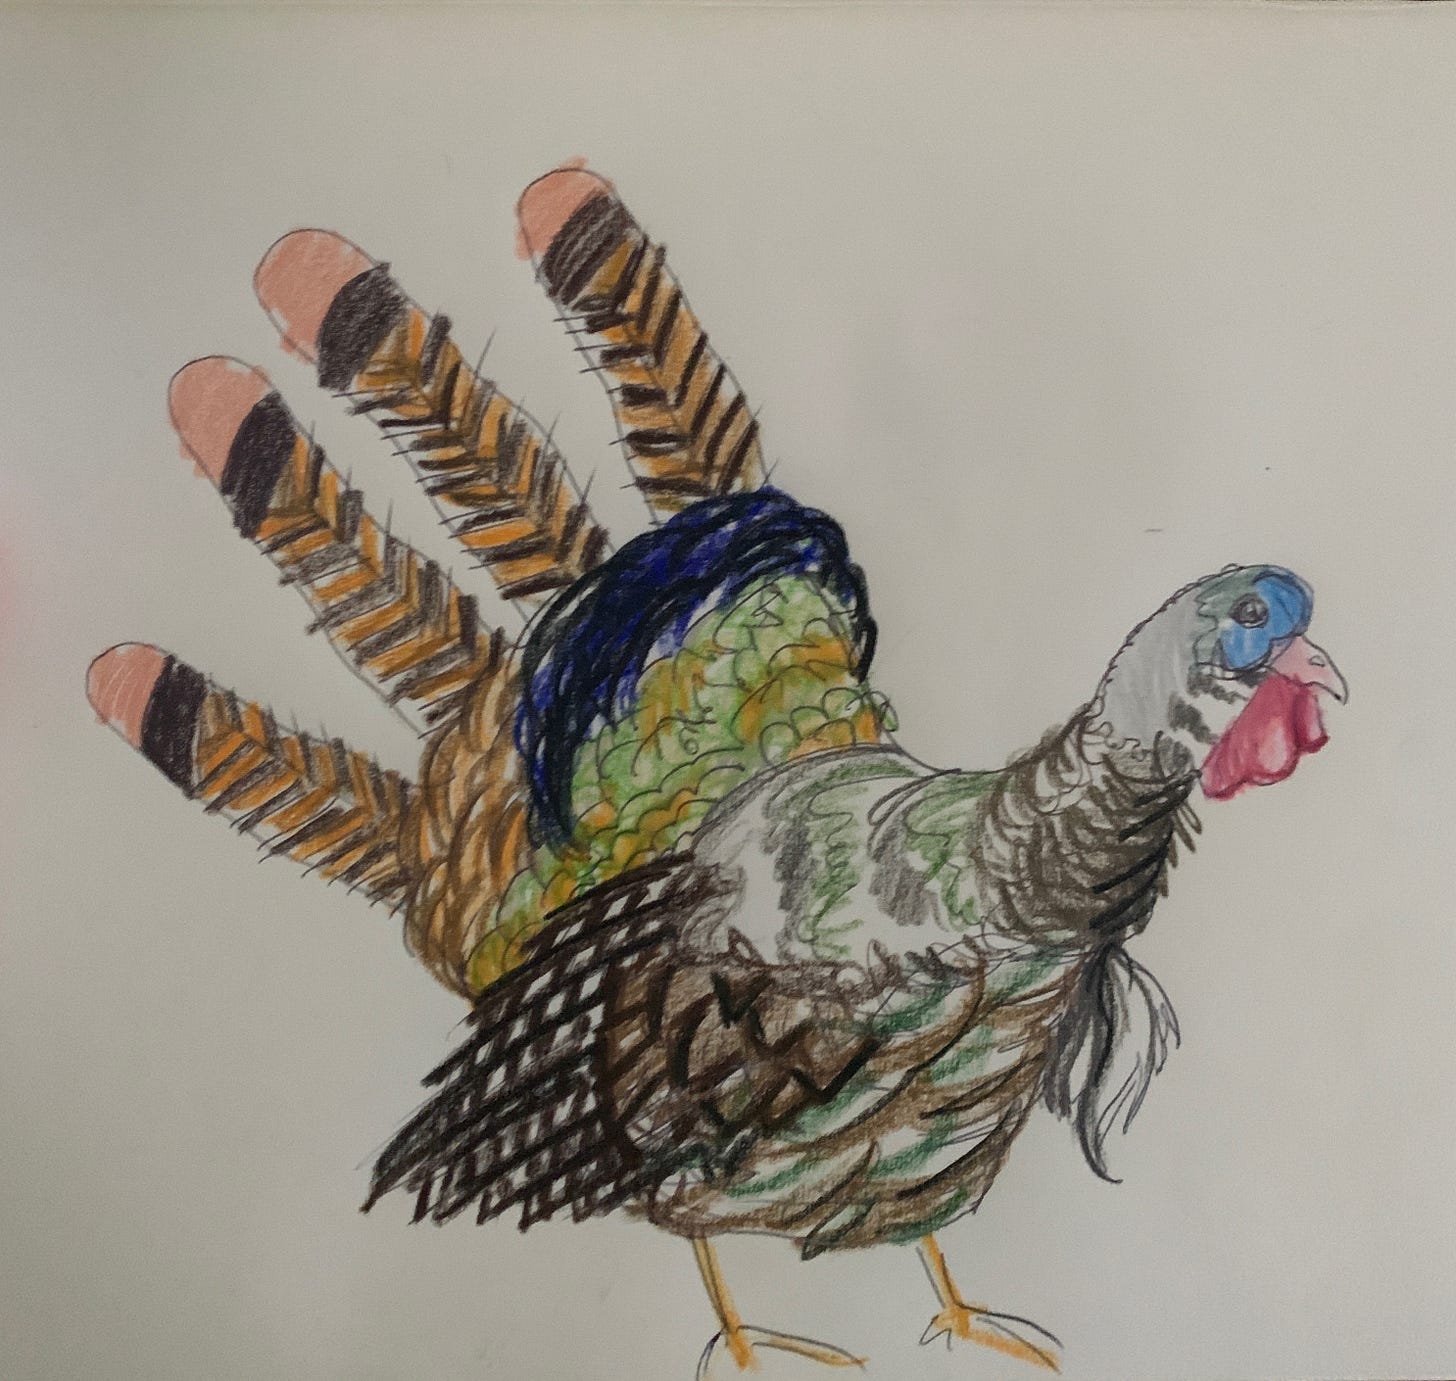 A turkey drawn from the traced outline of a hand. He looks VERY REALISTIC, except that his tail is clearly four fingers colored to look like turkey feathers. The overall effect is disturbing.